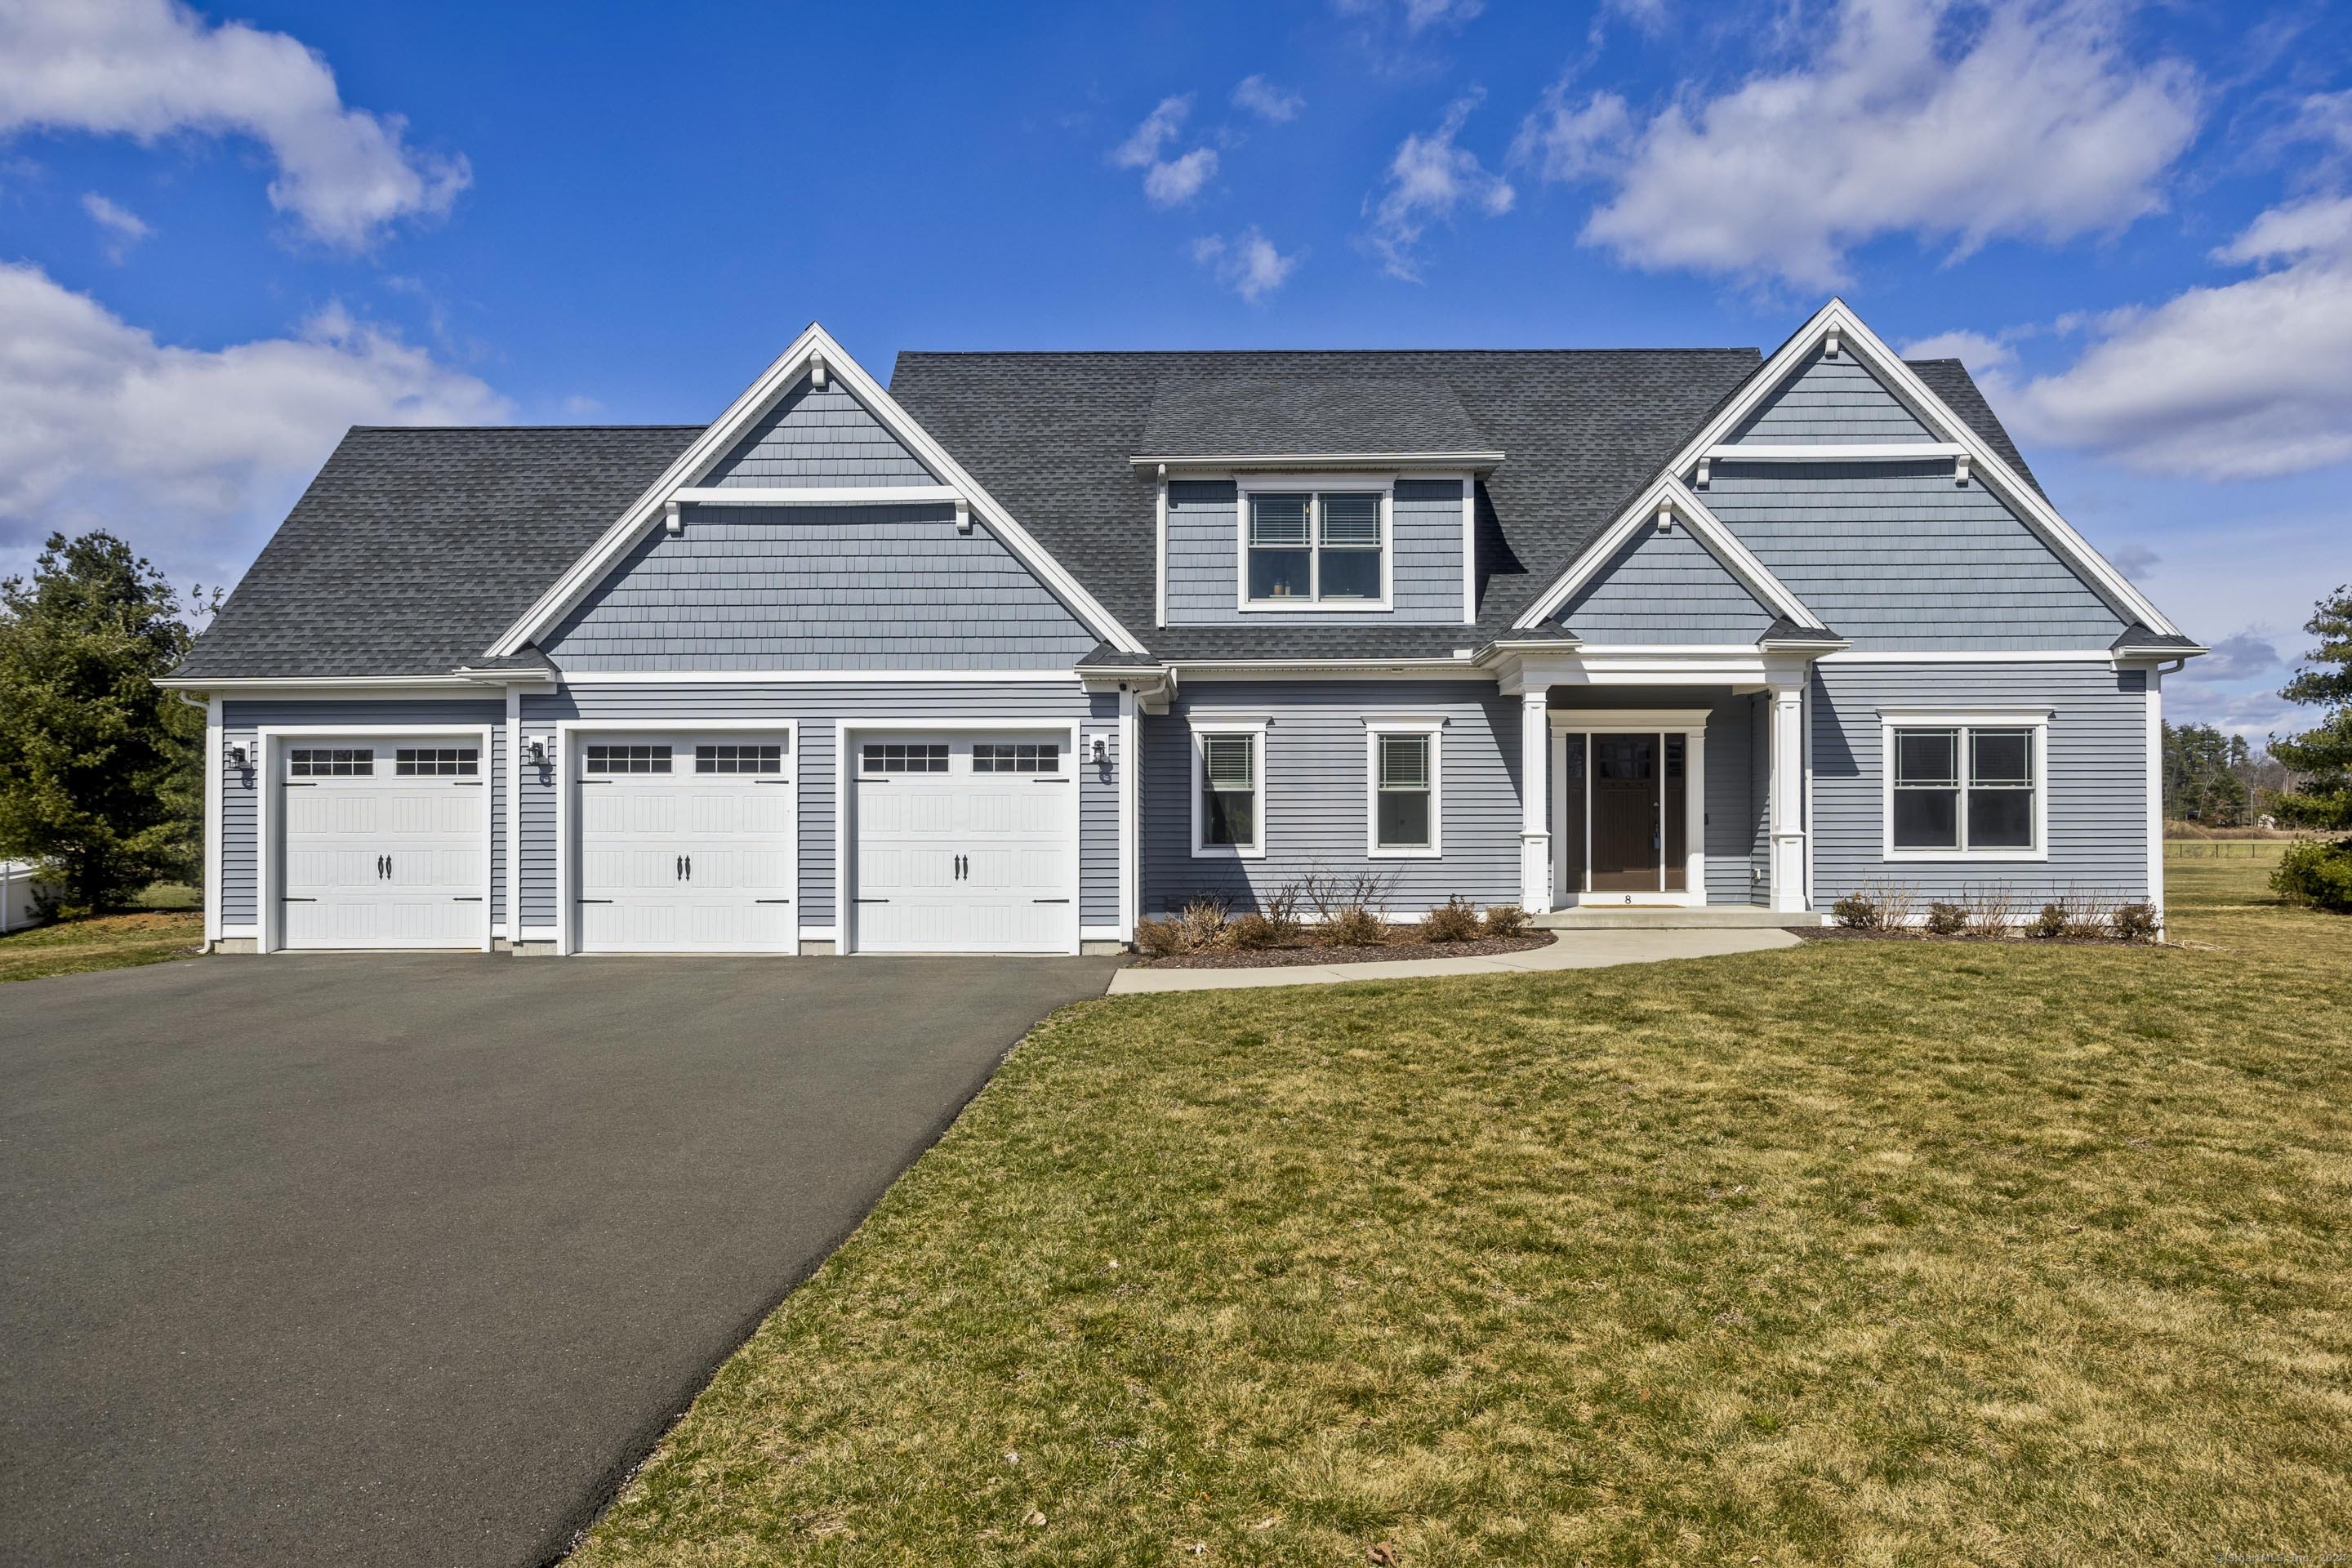 8 Stratton Farms Road, Suffield, Connecticut - 4 Bedrooms  
5 Bathrooms  
8 Rooms - 